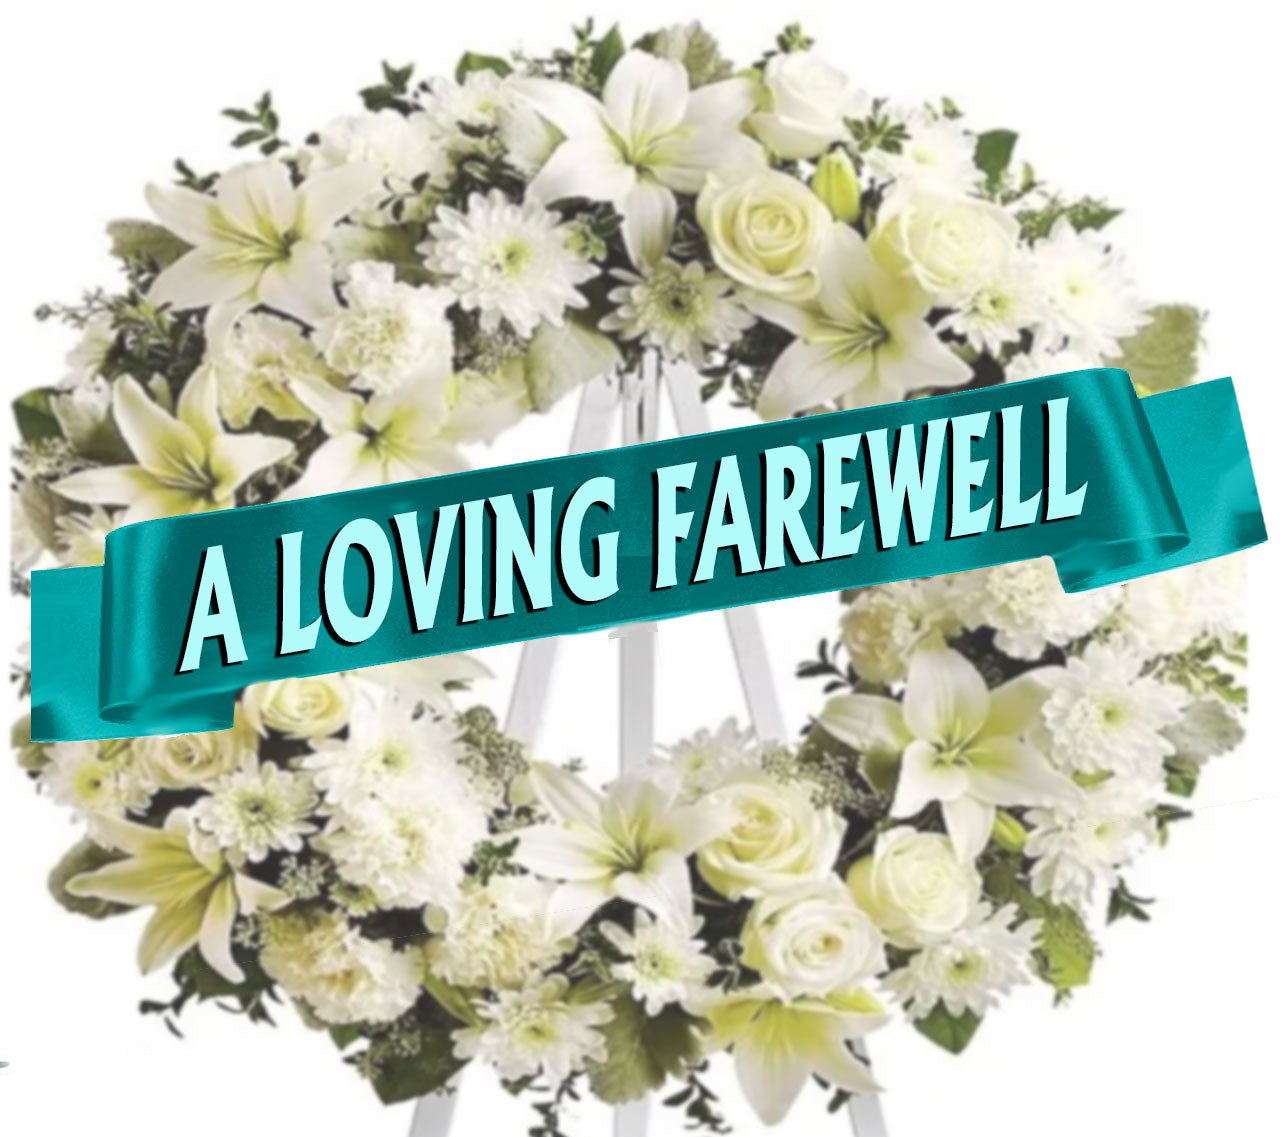 A Loving Farewell Funeral Flowers Ribbon Banner - Celebrate Prints